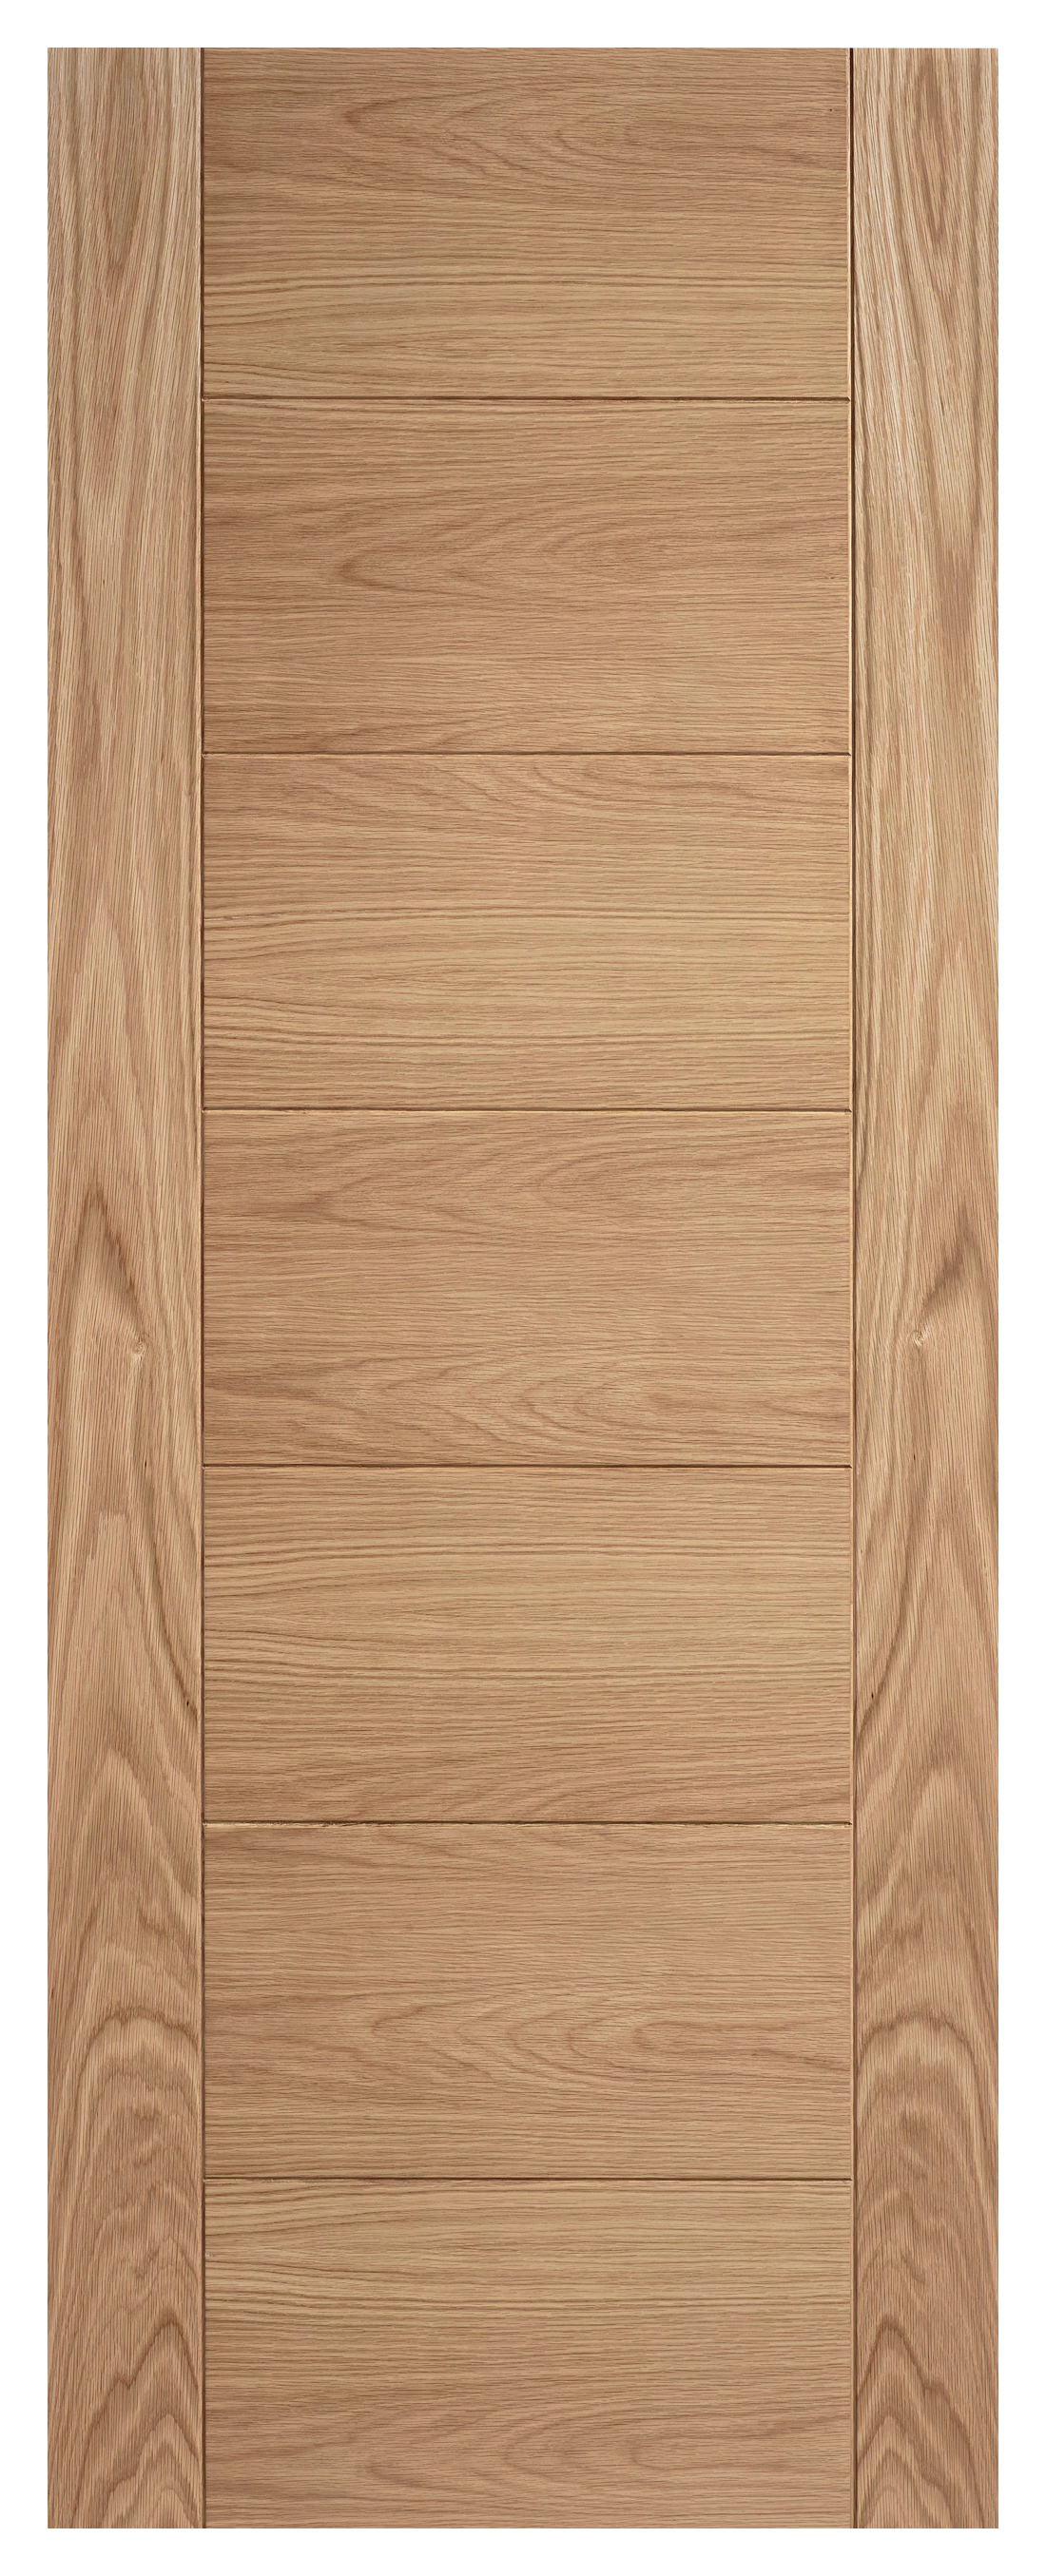 Image of LPD Internal Carini 7 Panel Pre-Finished Oak Solid Core Door - 457 x 1981mm